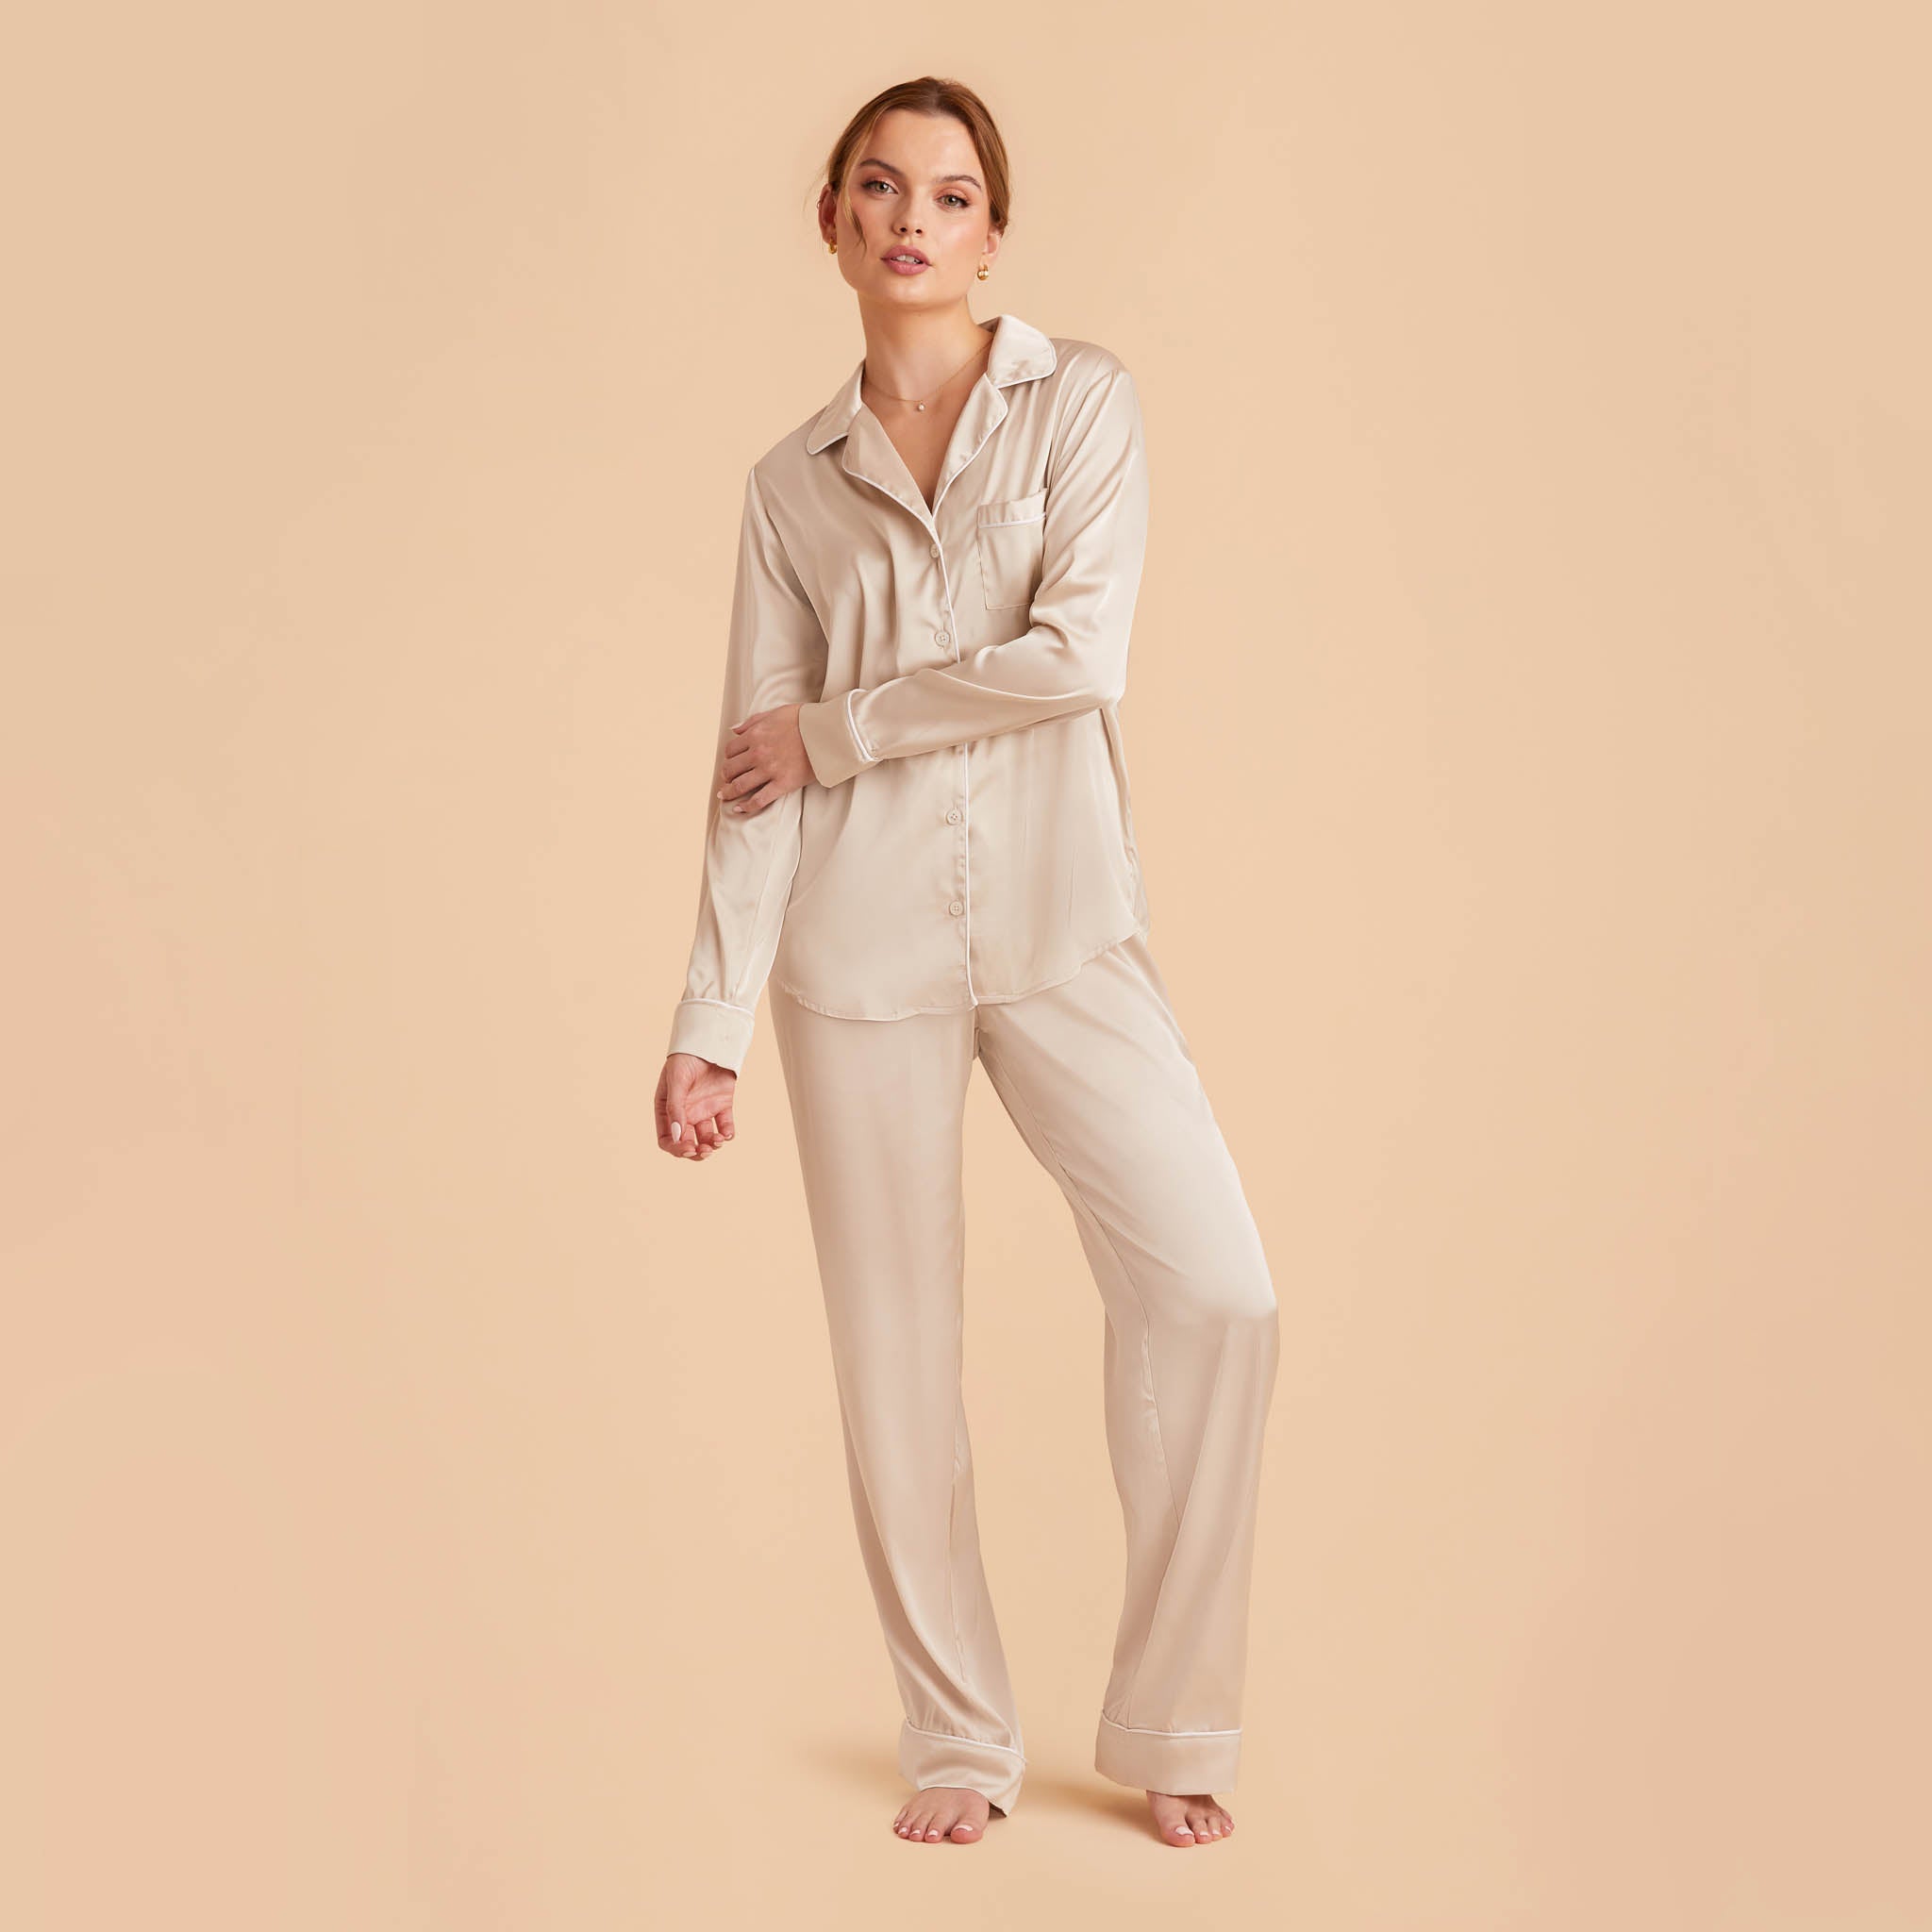 Jonny Satin Long Sleeve Pajama Top With White Piping in champagne, front view